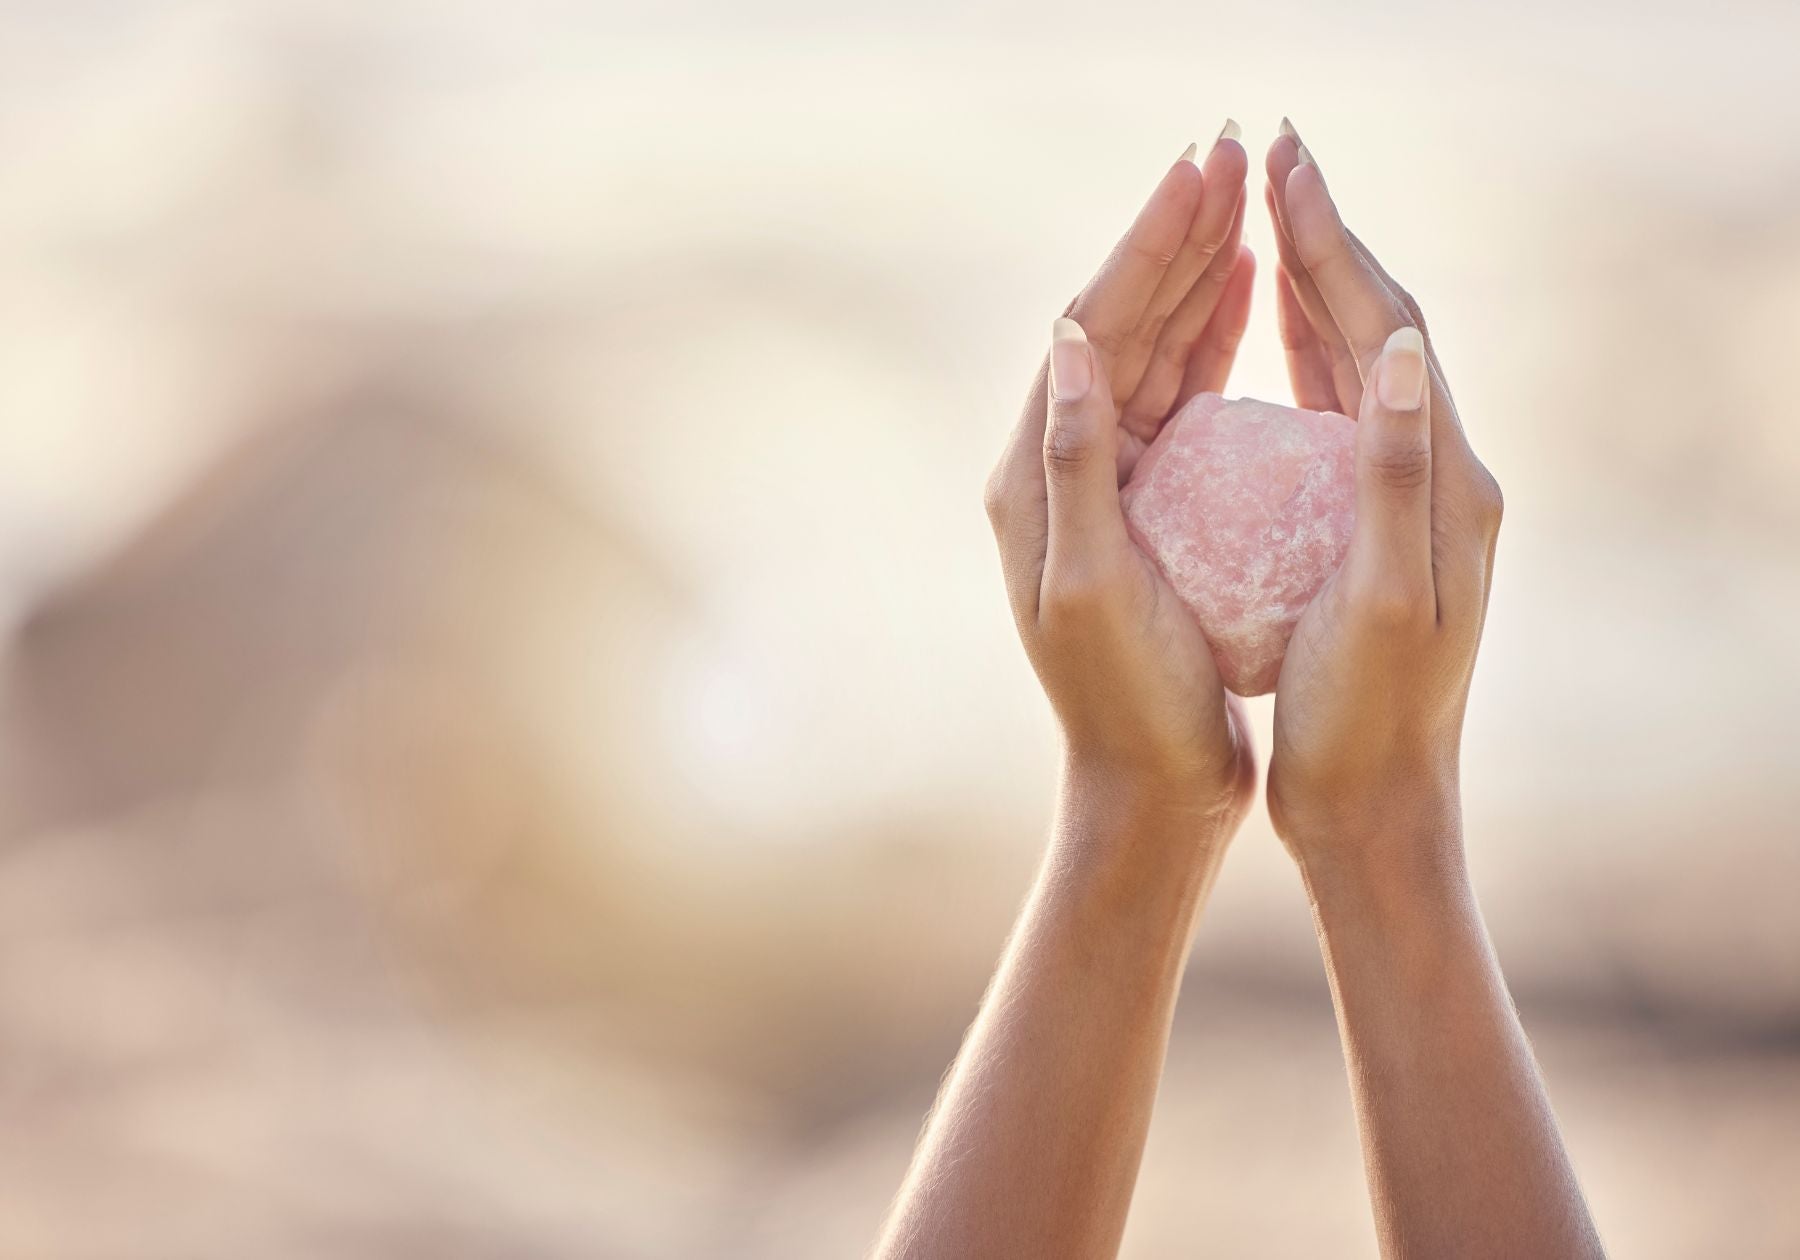 How Can You Use Crystals For Healing?